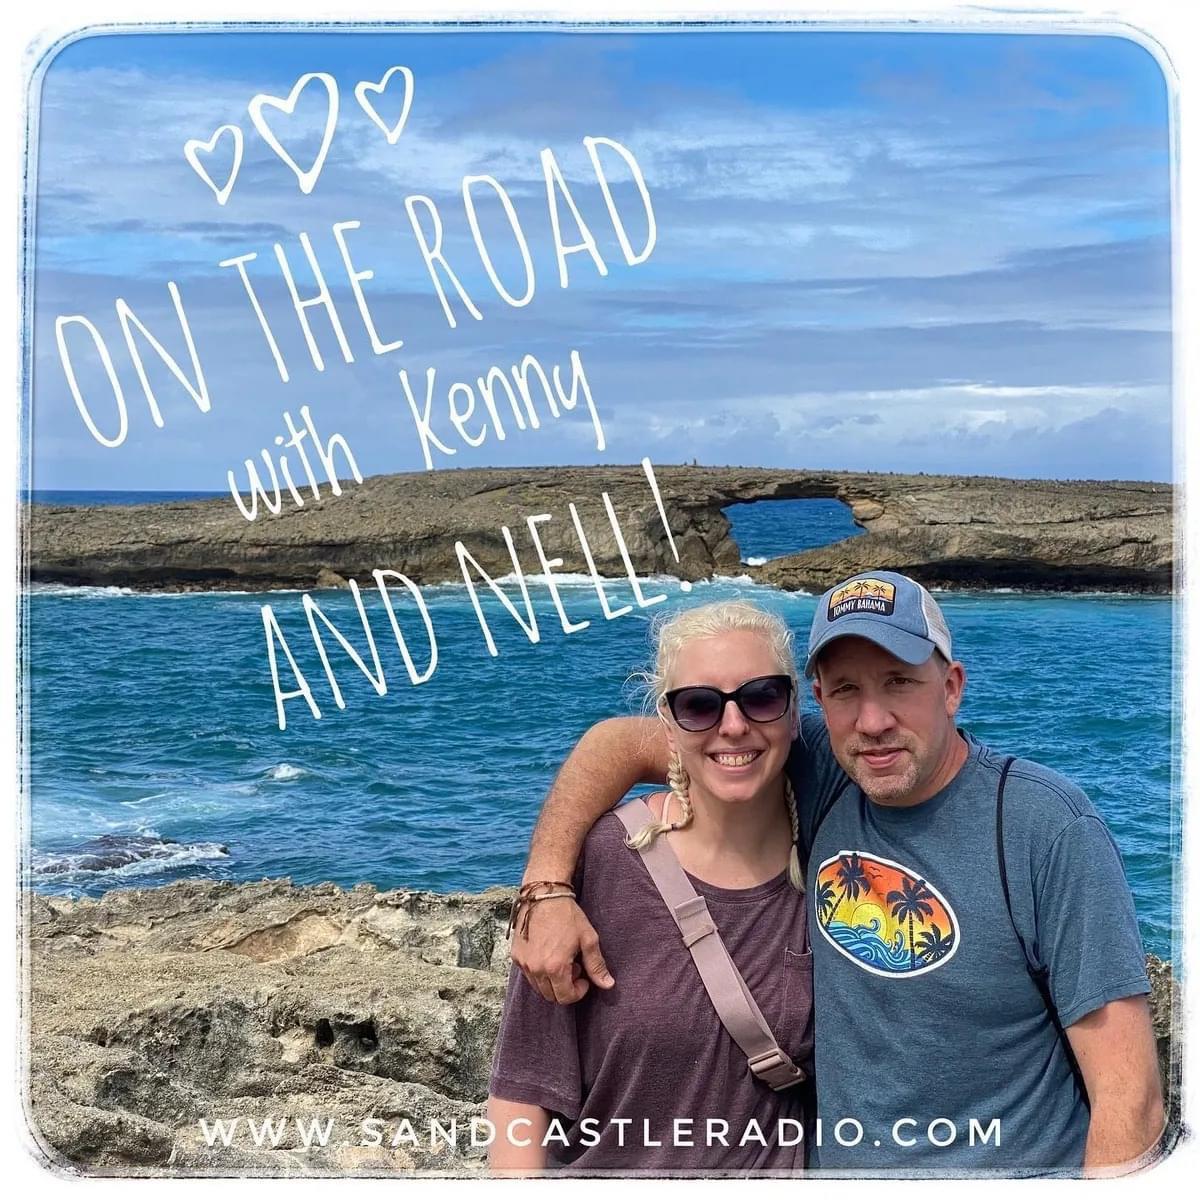 Kenny and Nell's images